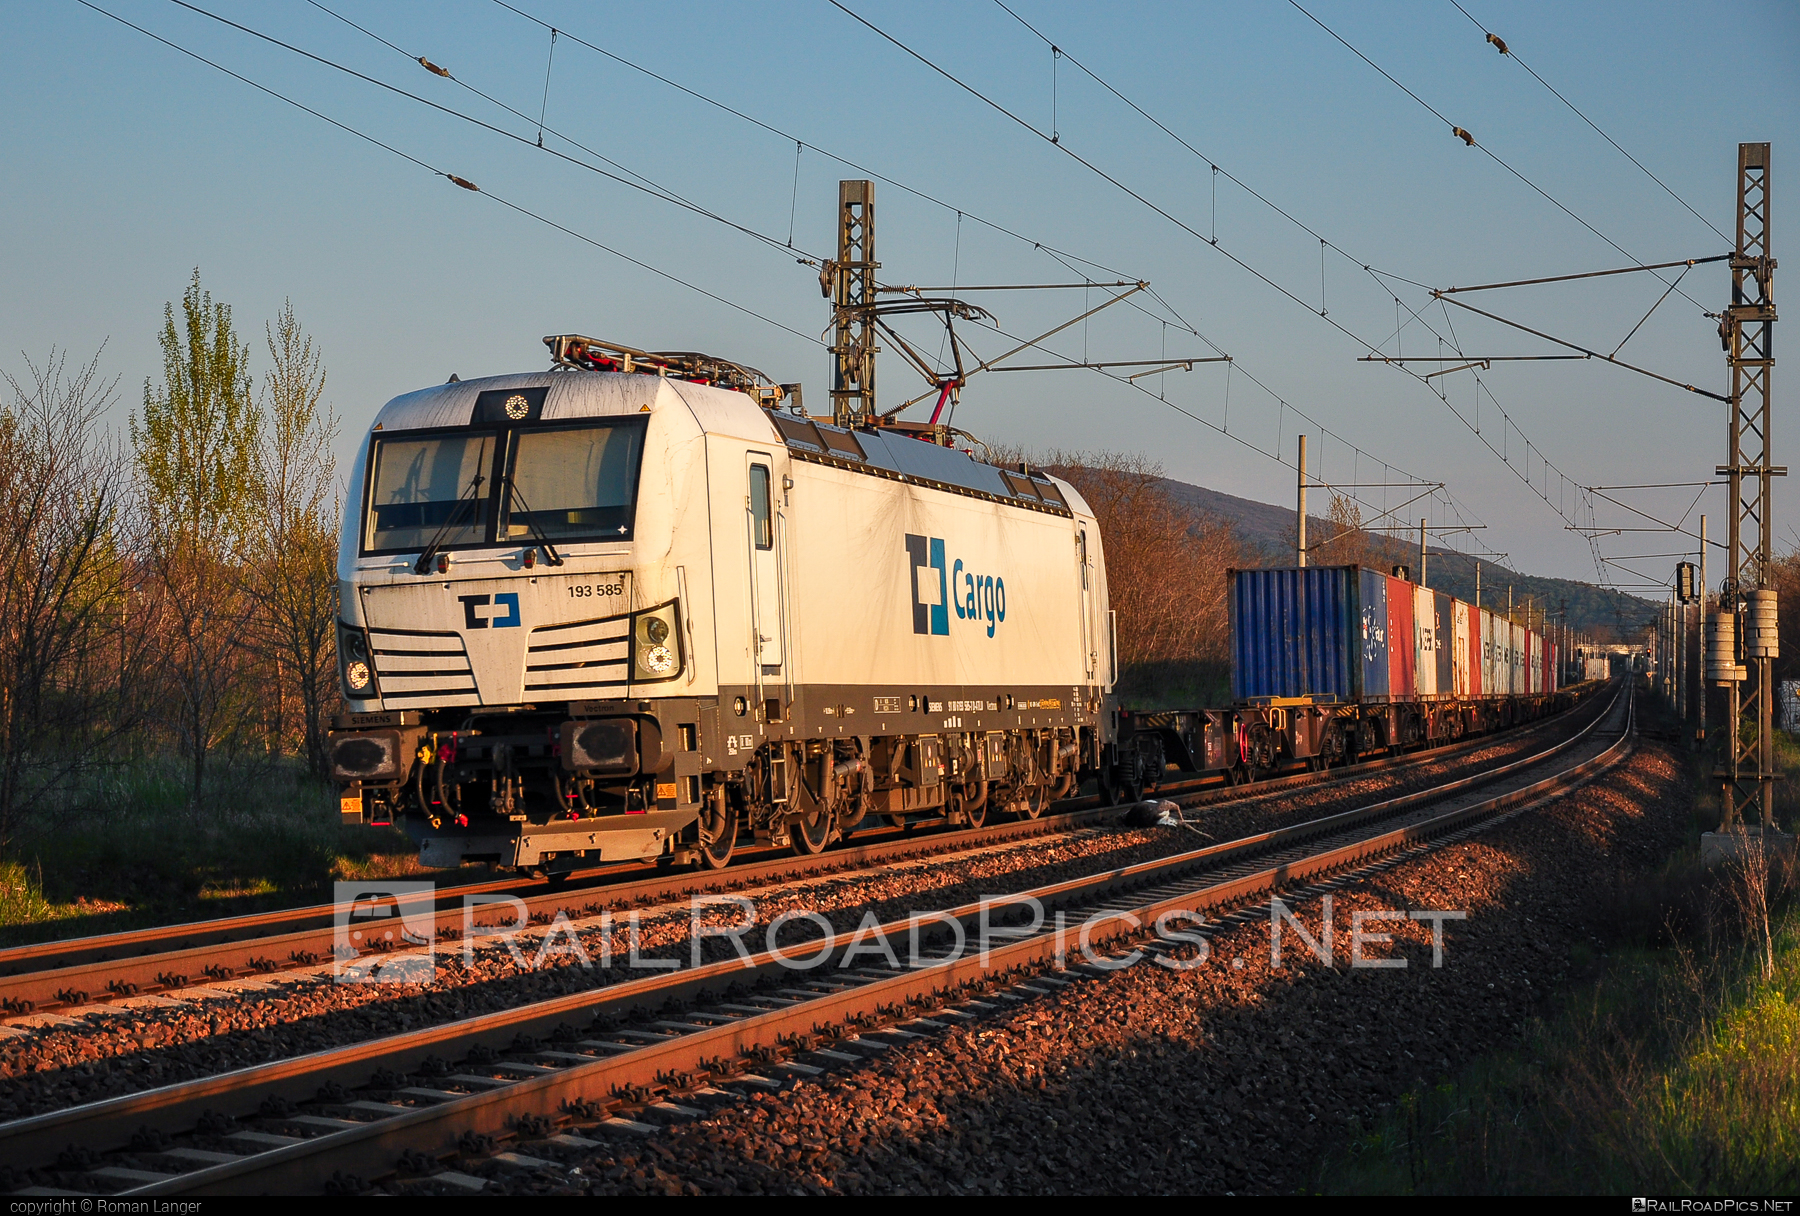 Siemens Vectron MS - 193 585 operated by ČD Cargo, a.s. #alphatrainsluxembourg #cdcargo #container #flatwagon #maersk #siemens #siemensVectron #siemensVectronMS #vectron #vectronMS